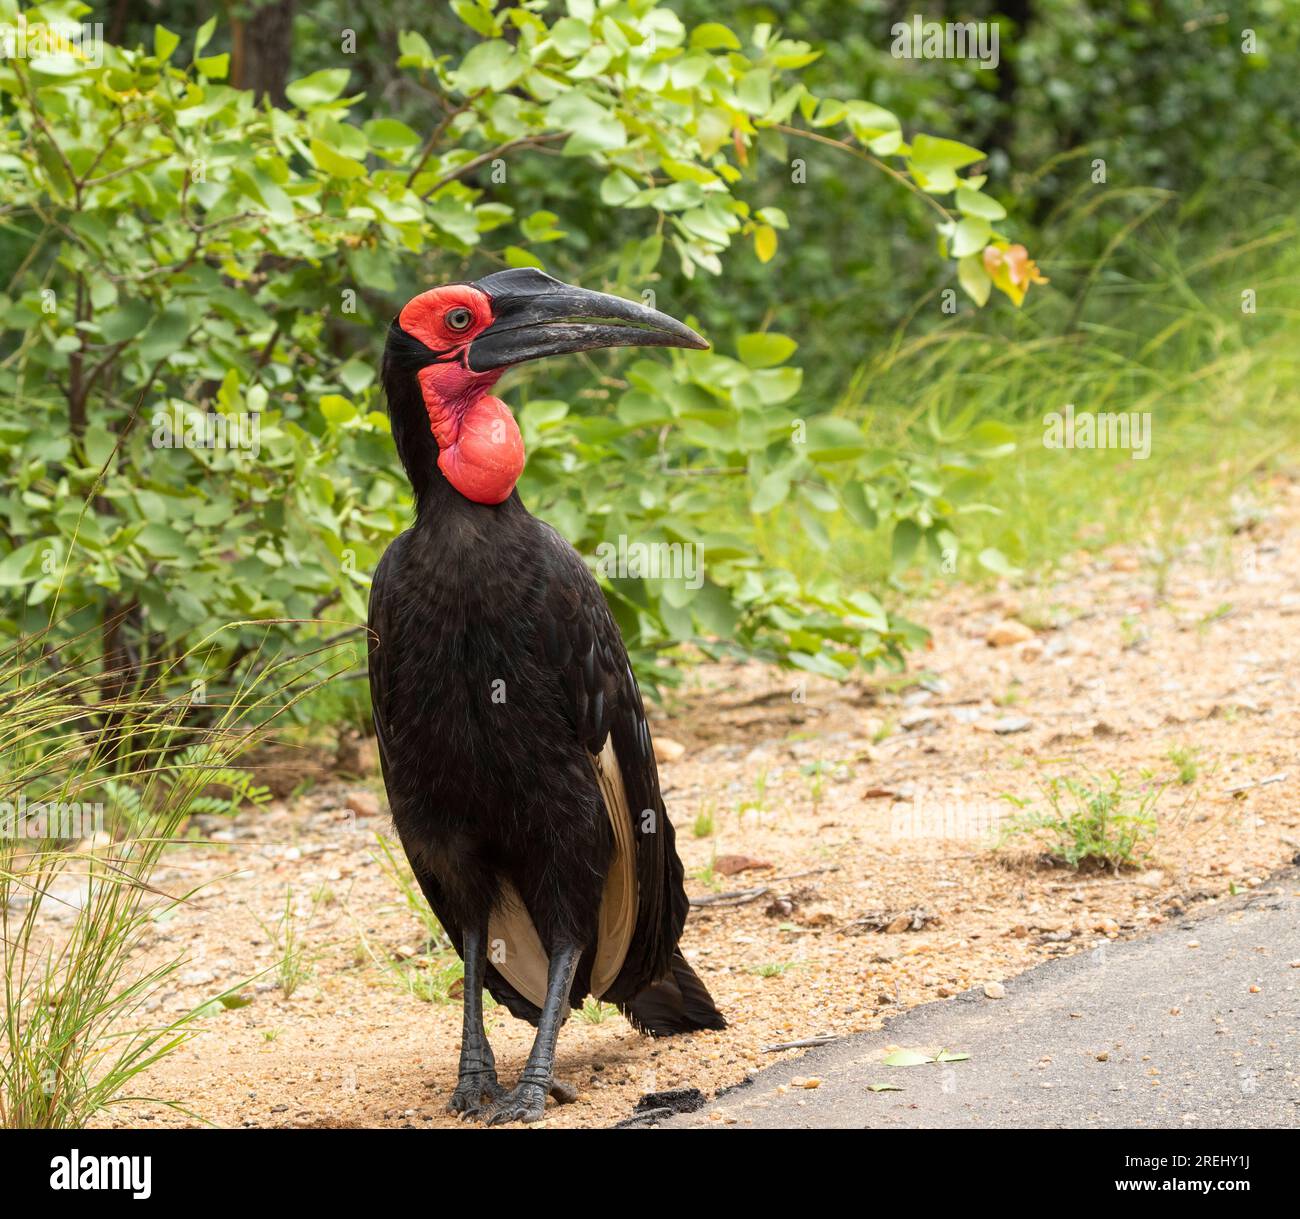 A single Southern Ground-Hornbill walking next to a road in the Kruger National park, South Africa Stock Photo